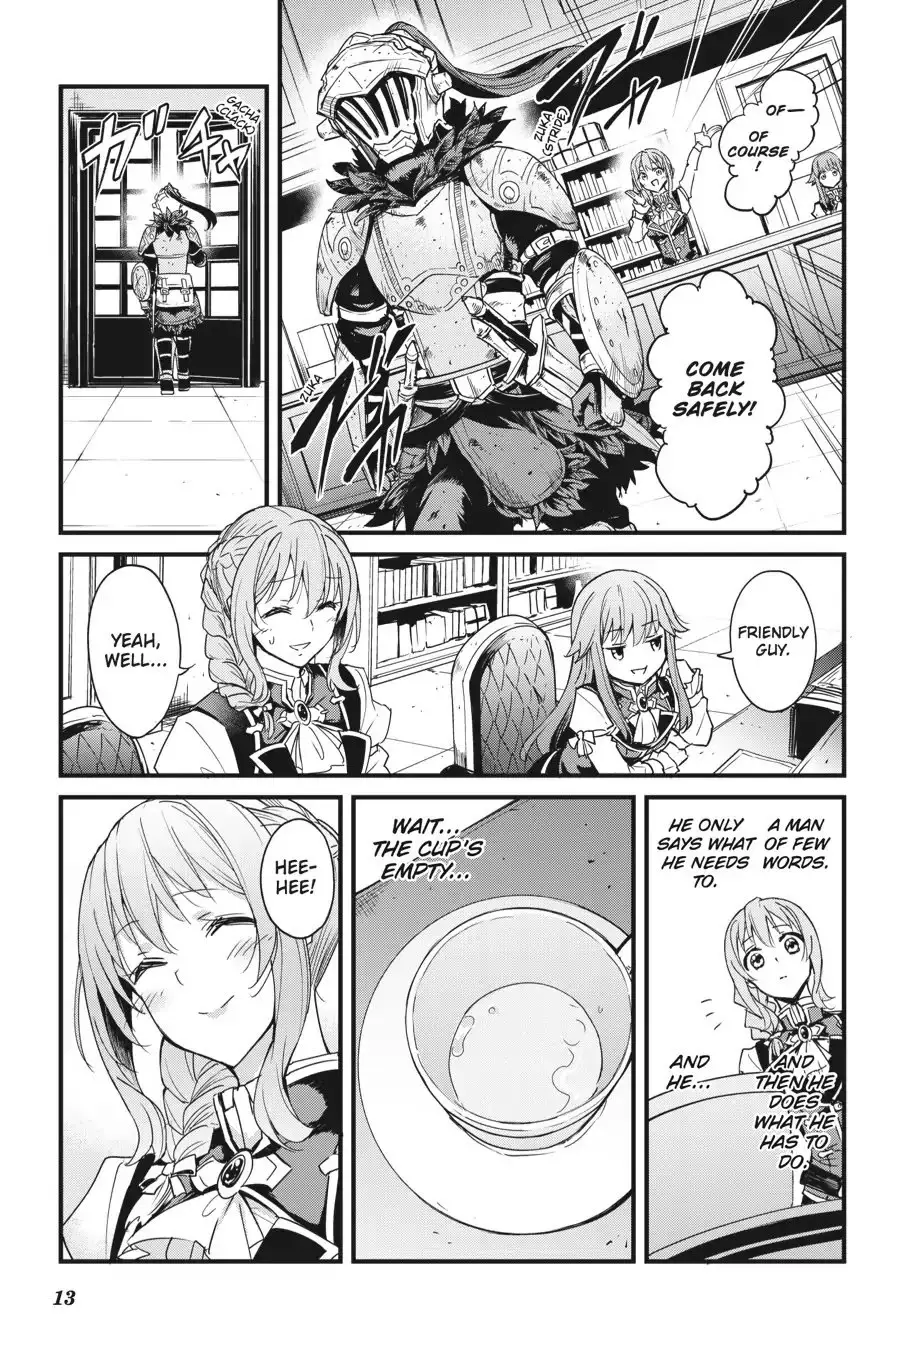 Goblin Slayer: Side Story Year One - 32 page 13